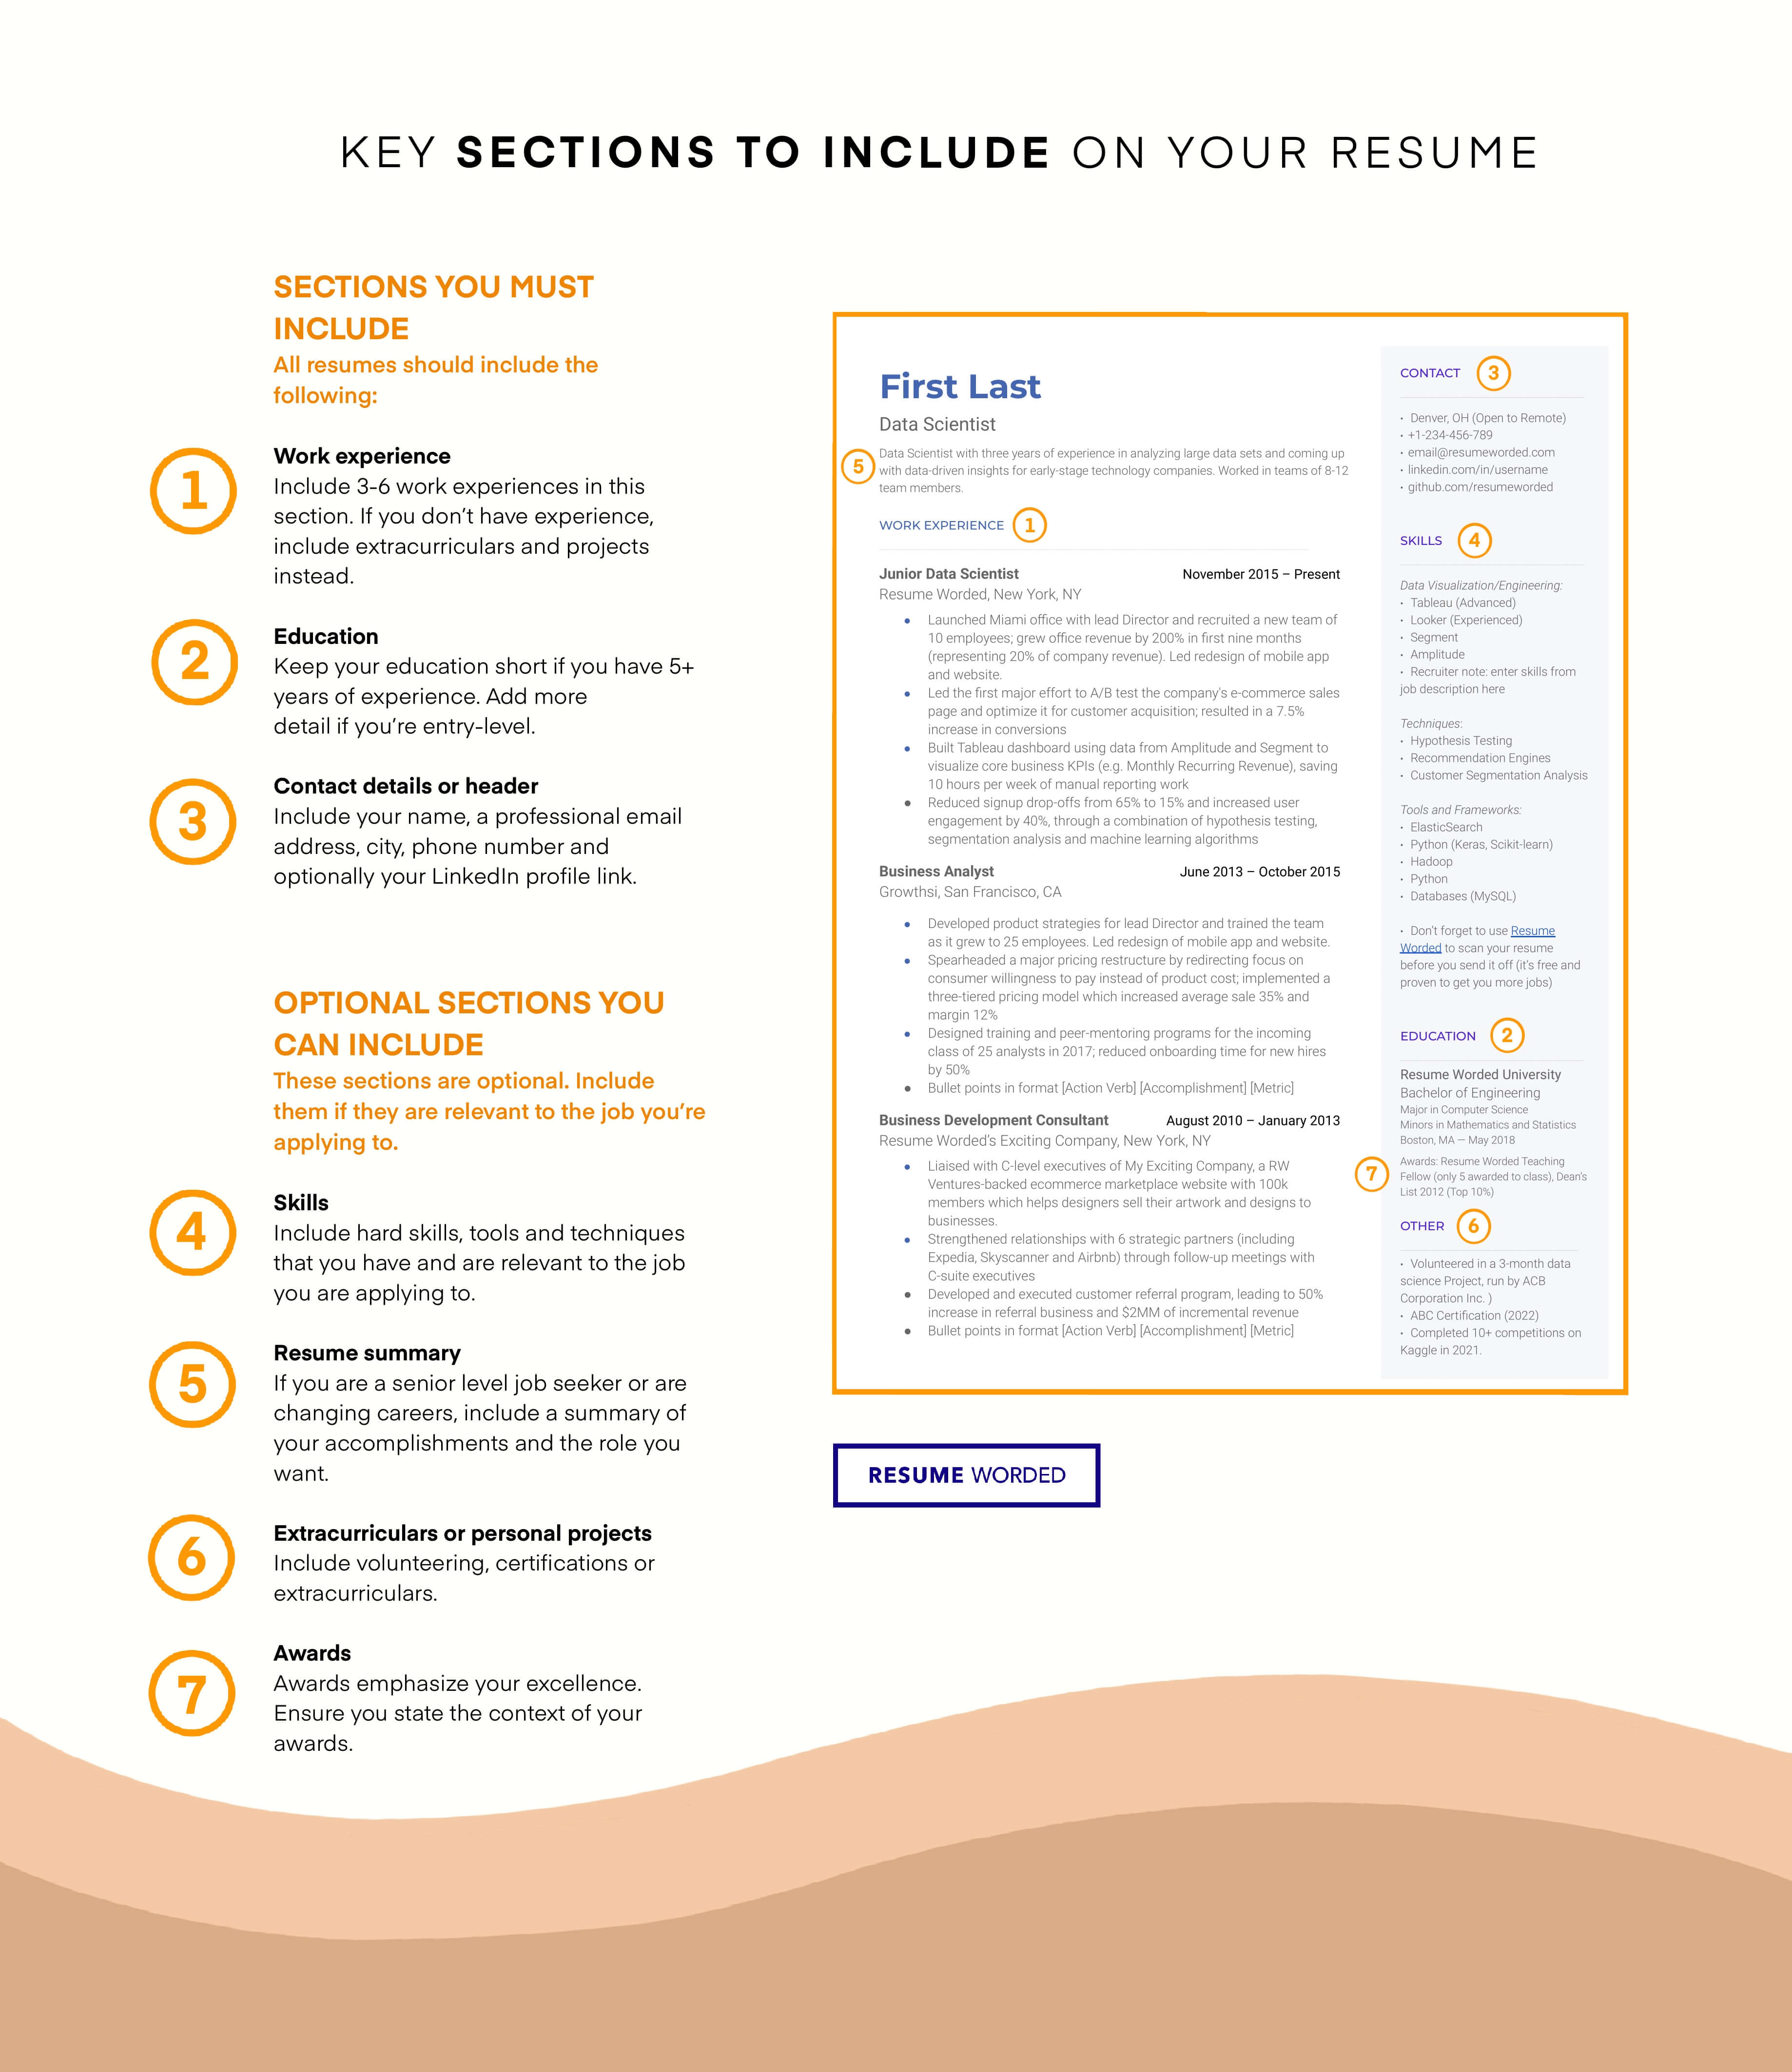 Include key achievements in your introduction section. - Transactional Attorney Resume